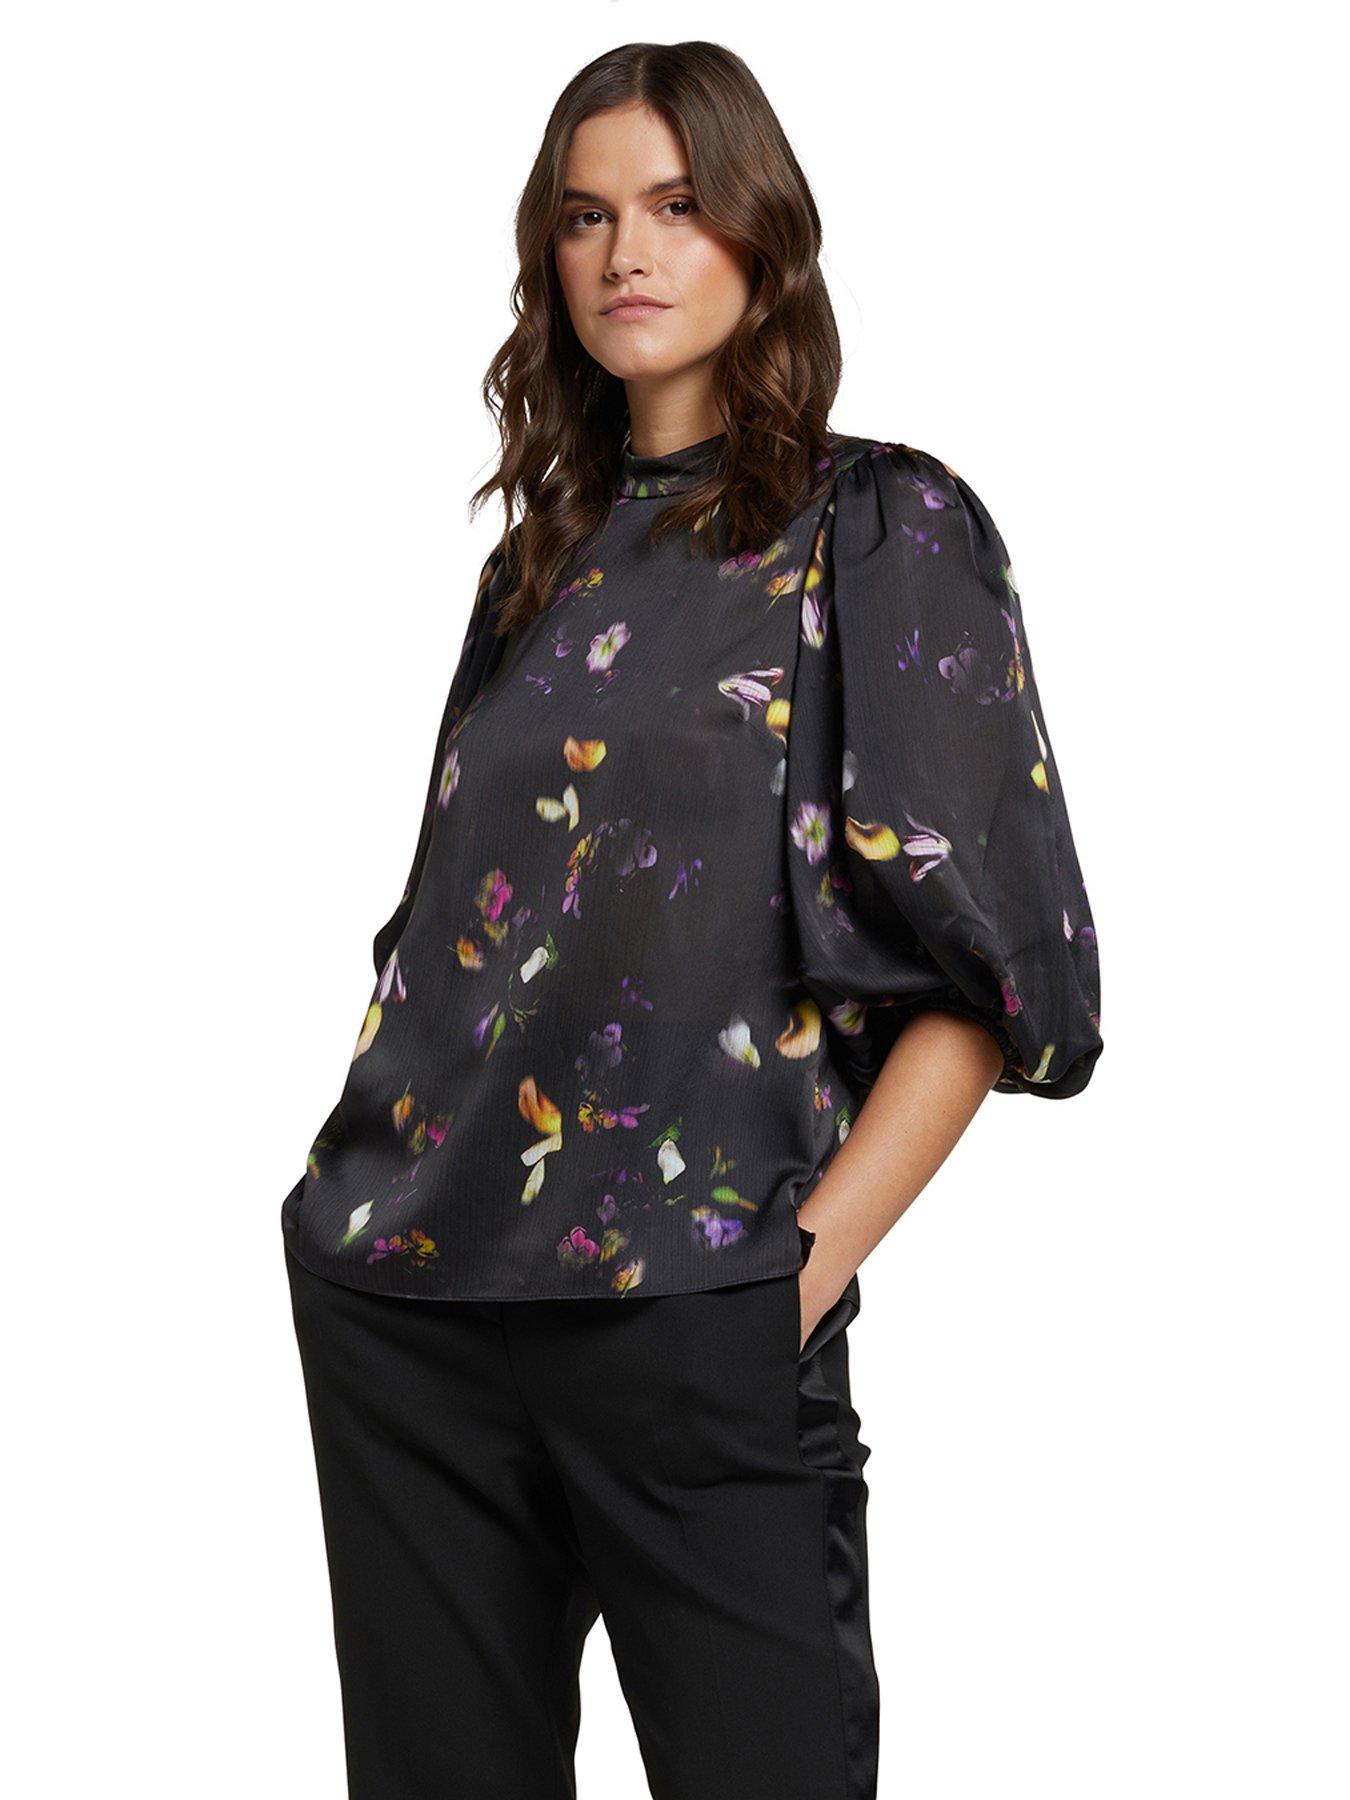 Ted Baker Niycole High Neck Top With Balloon Sleeves - Black, Black, Size 5=16, Women